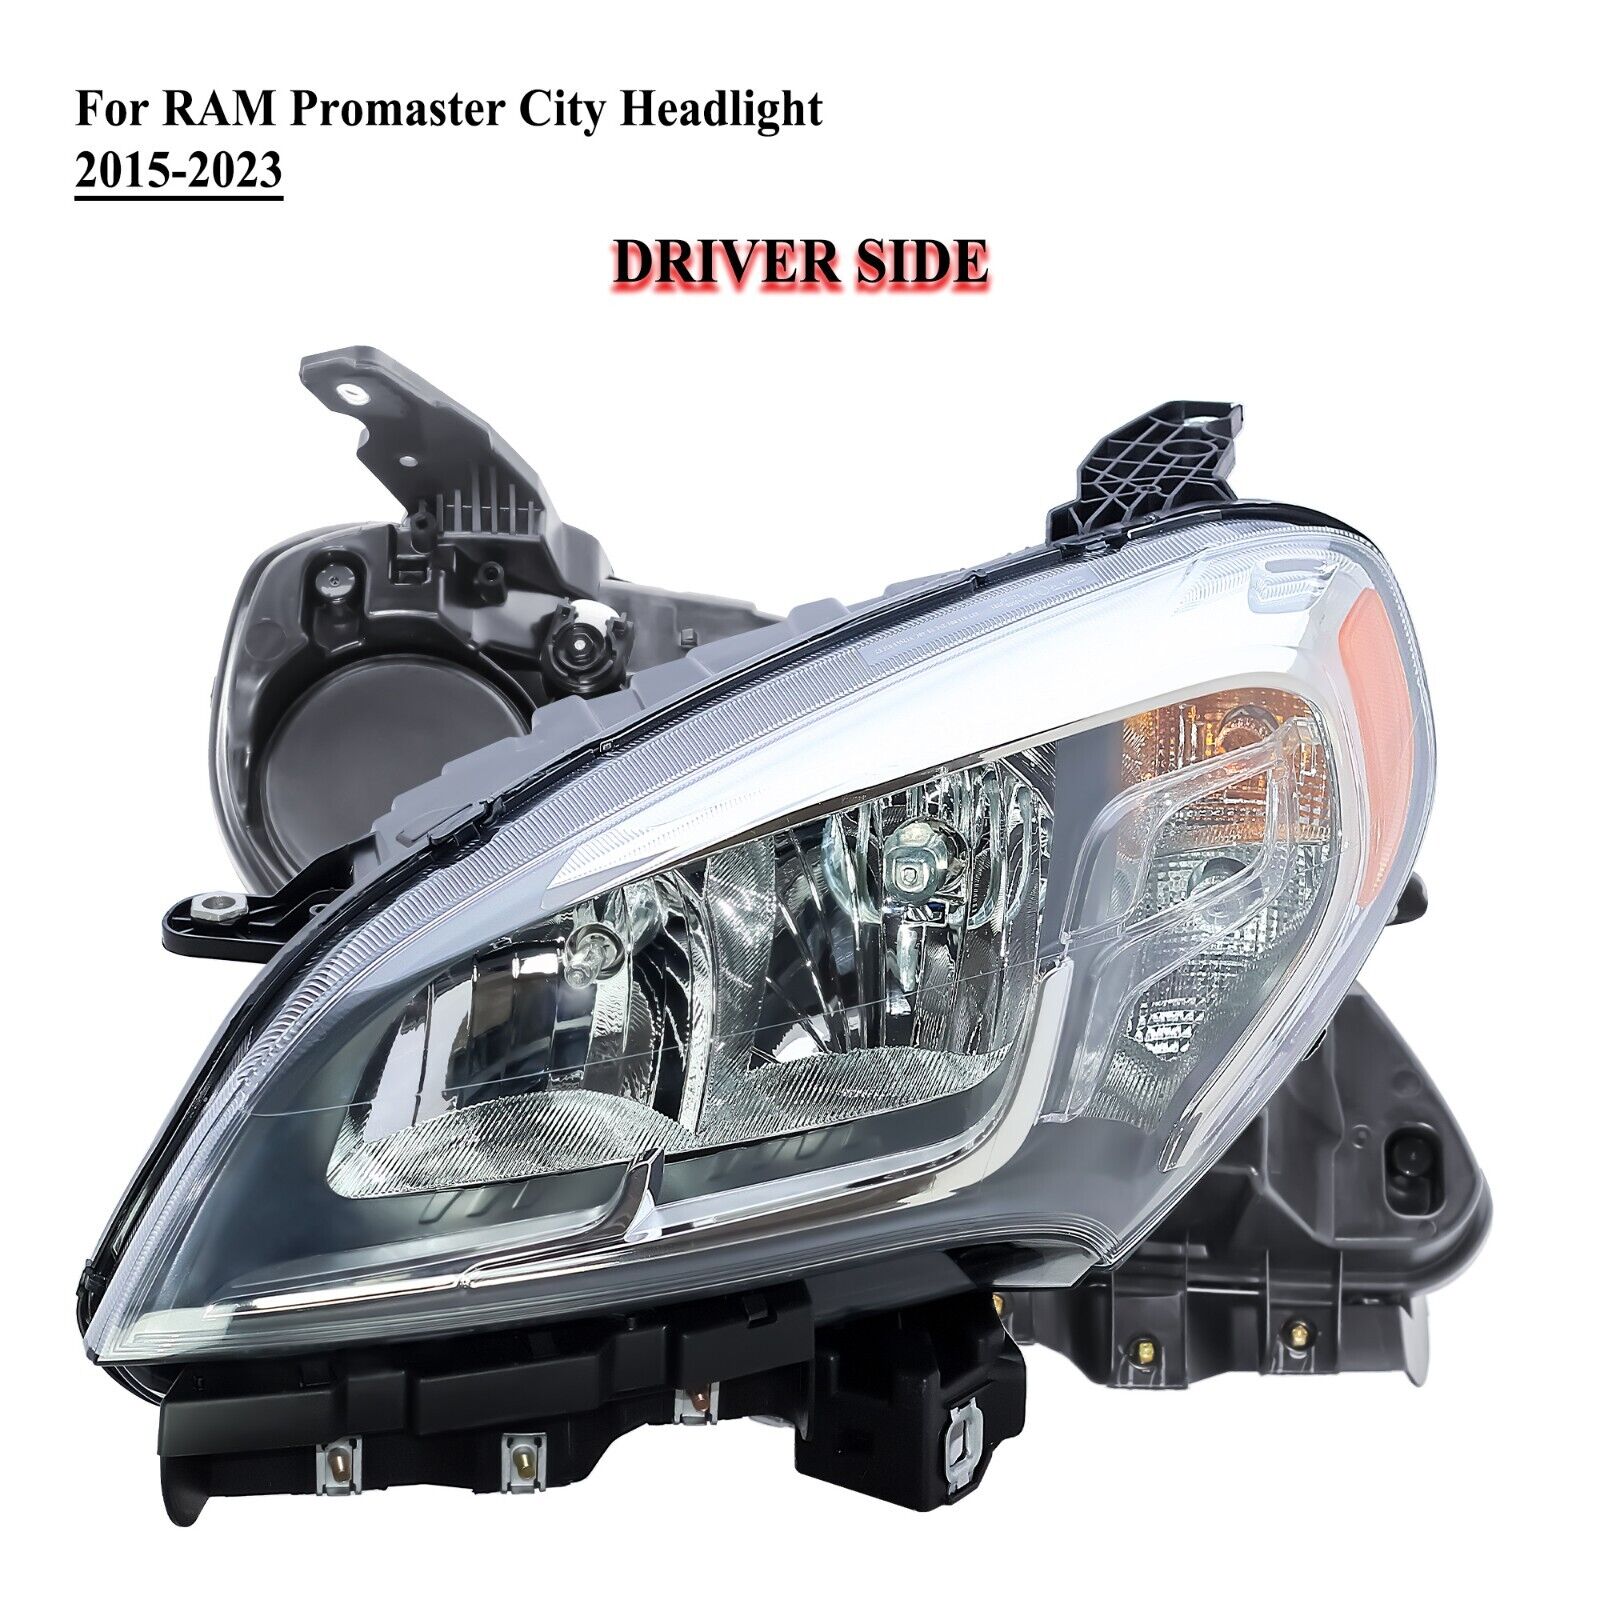 Driver Left Side Headlight Headlamp with Bulbs for RAM Promaster City 2015-2023